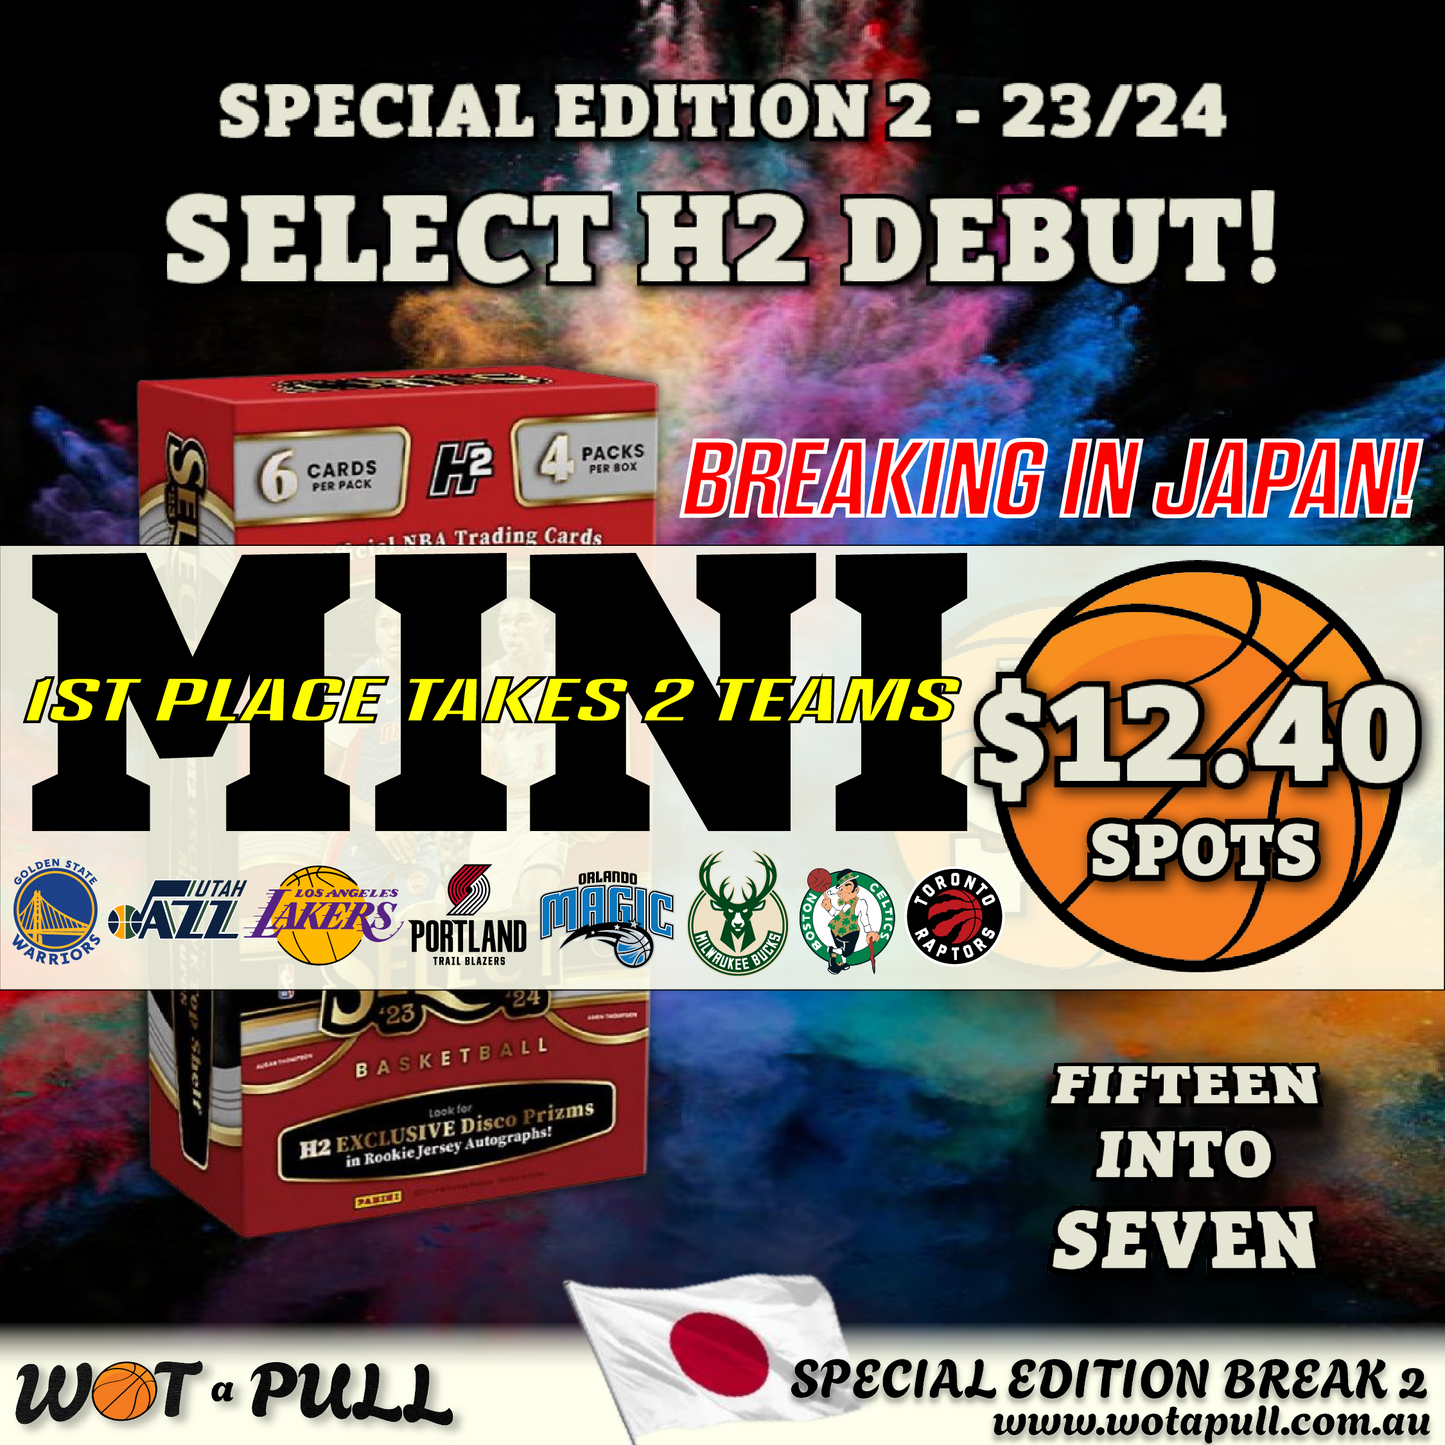 2023-24 SLECT H2 DEBUT FROM JAPAN PYT CLOSING MINI!